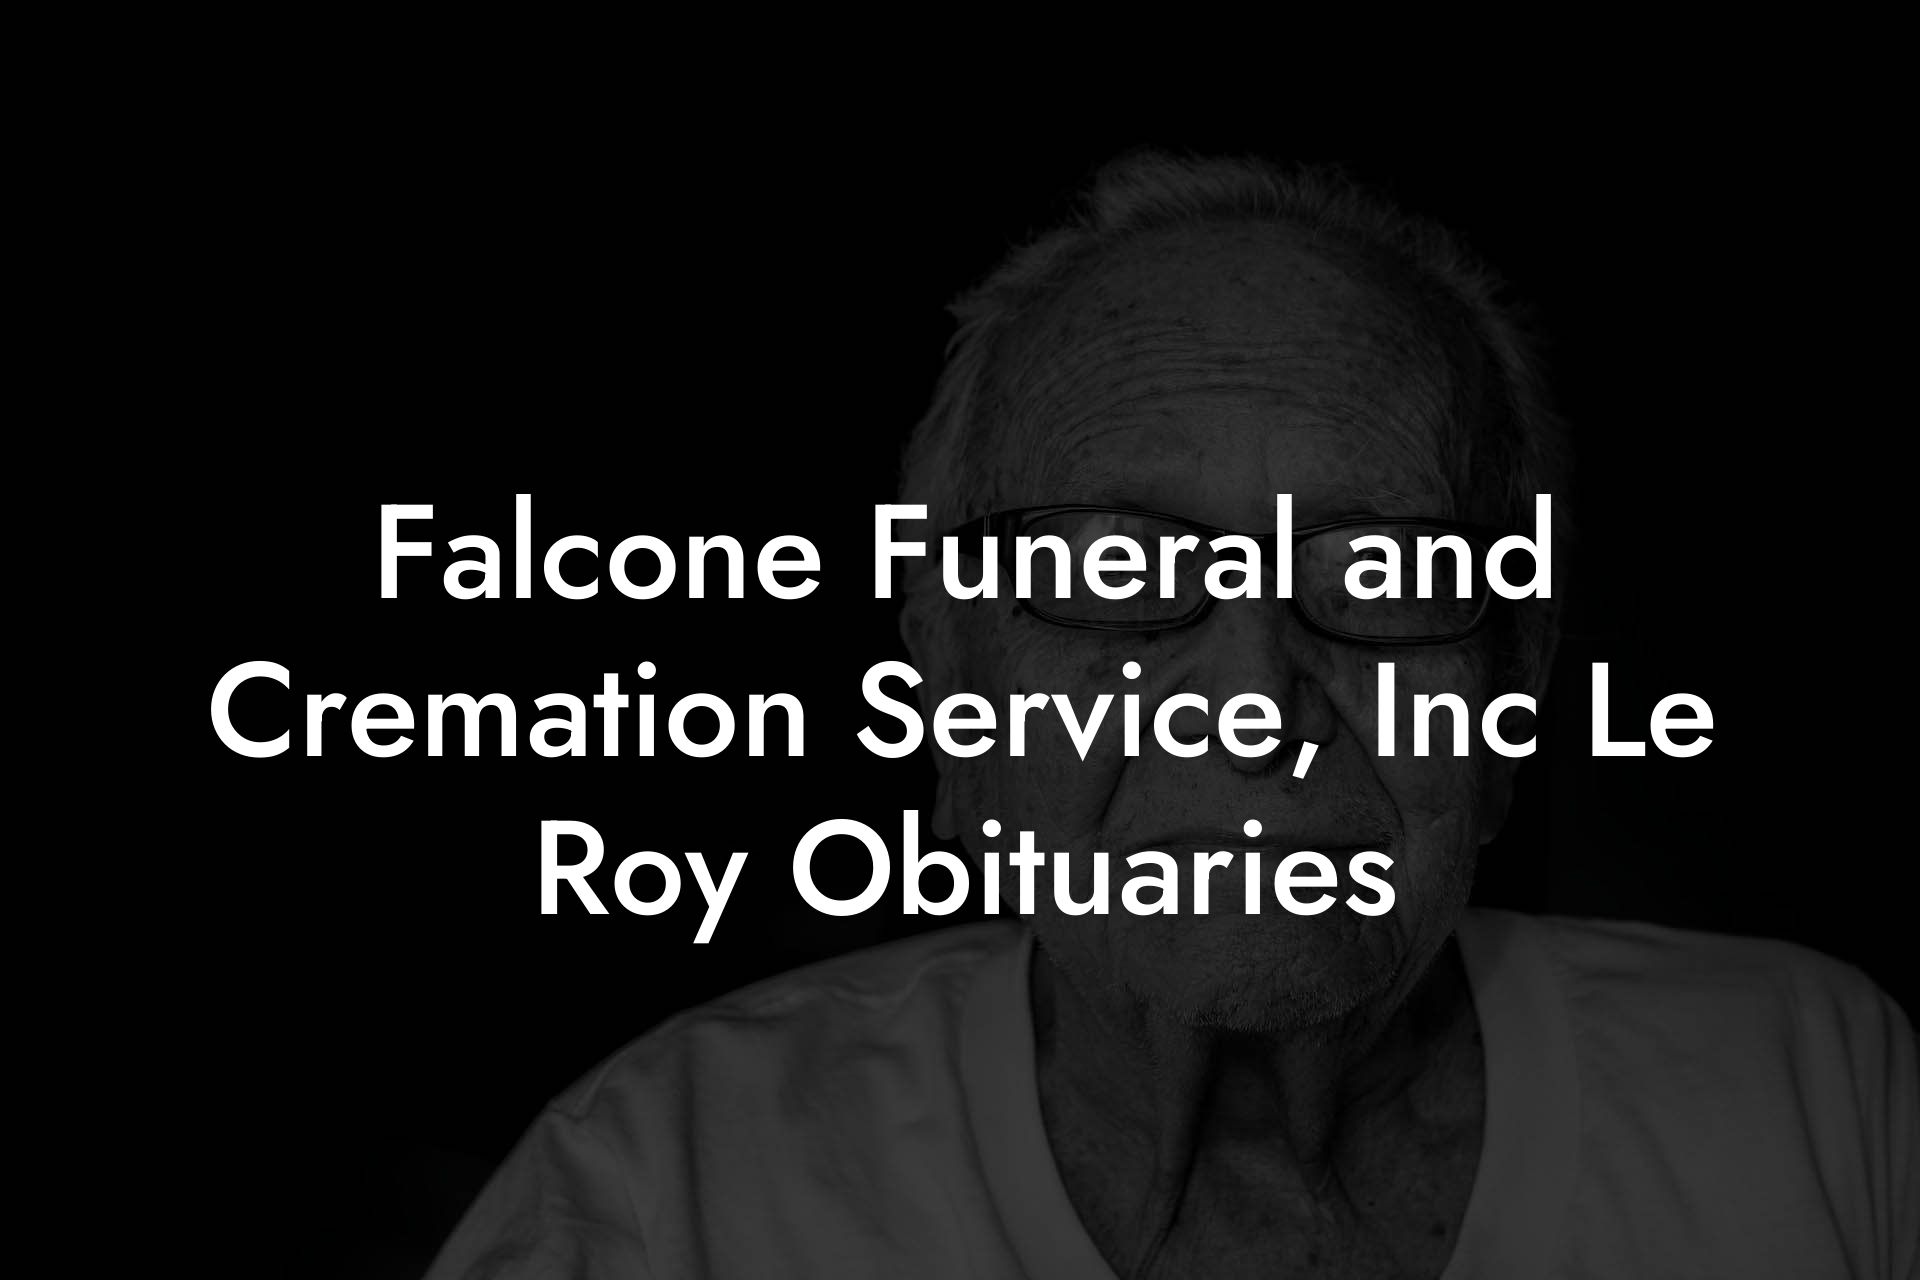 Falcone Funeral and Cremation Service, Inc Le Roy Obituaries